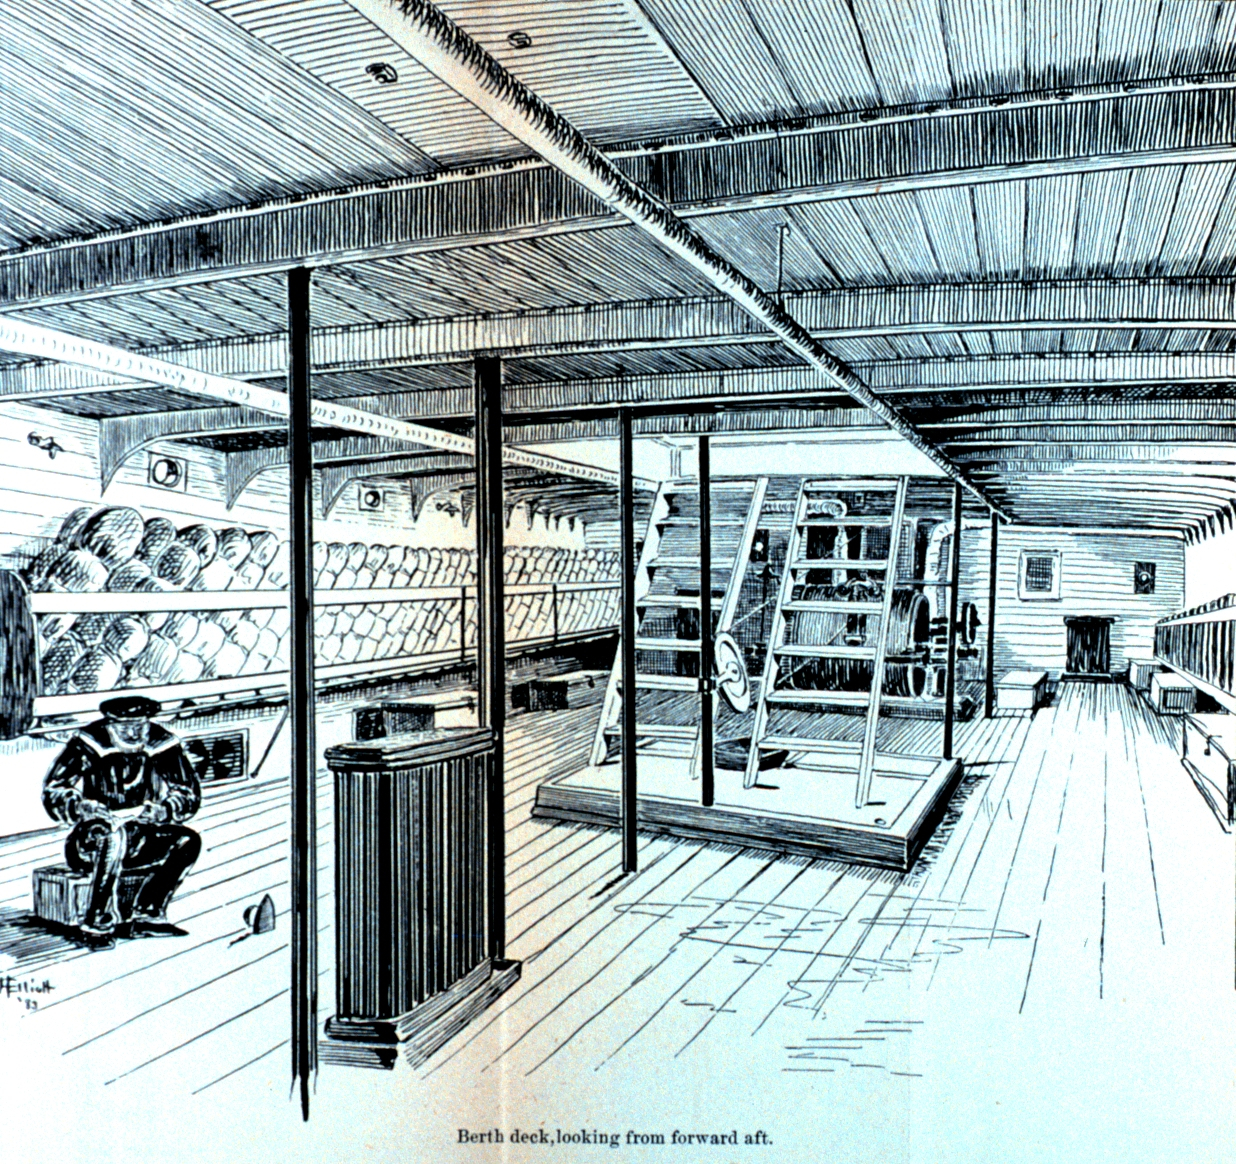 Berth-deck, looking forward from aft